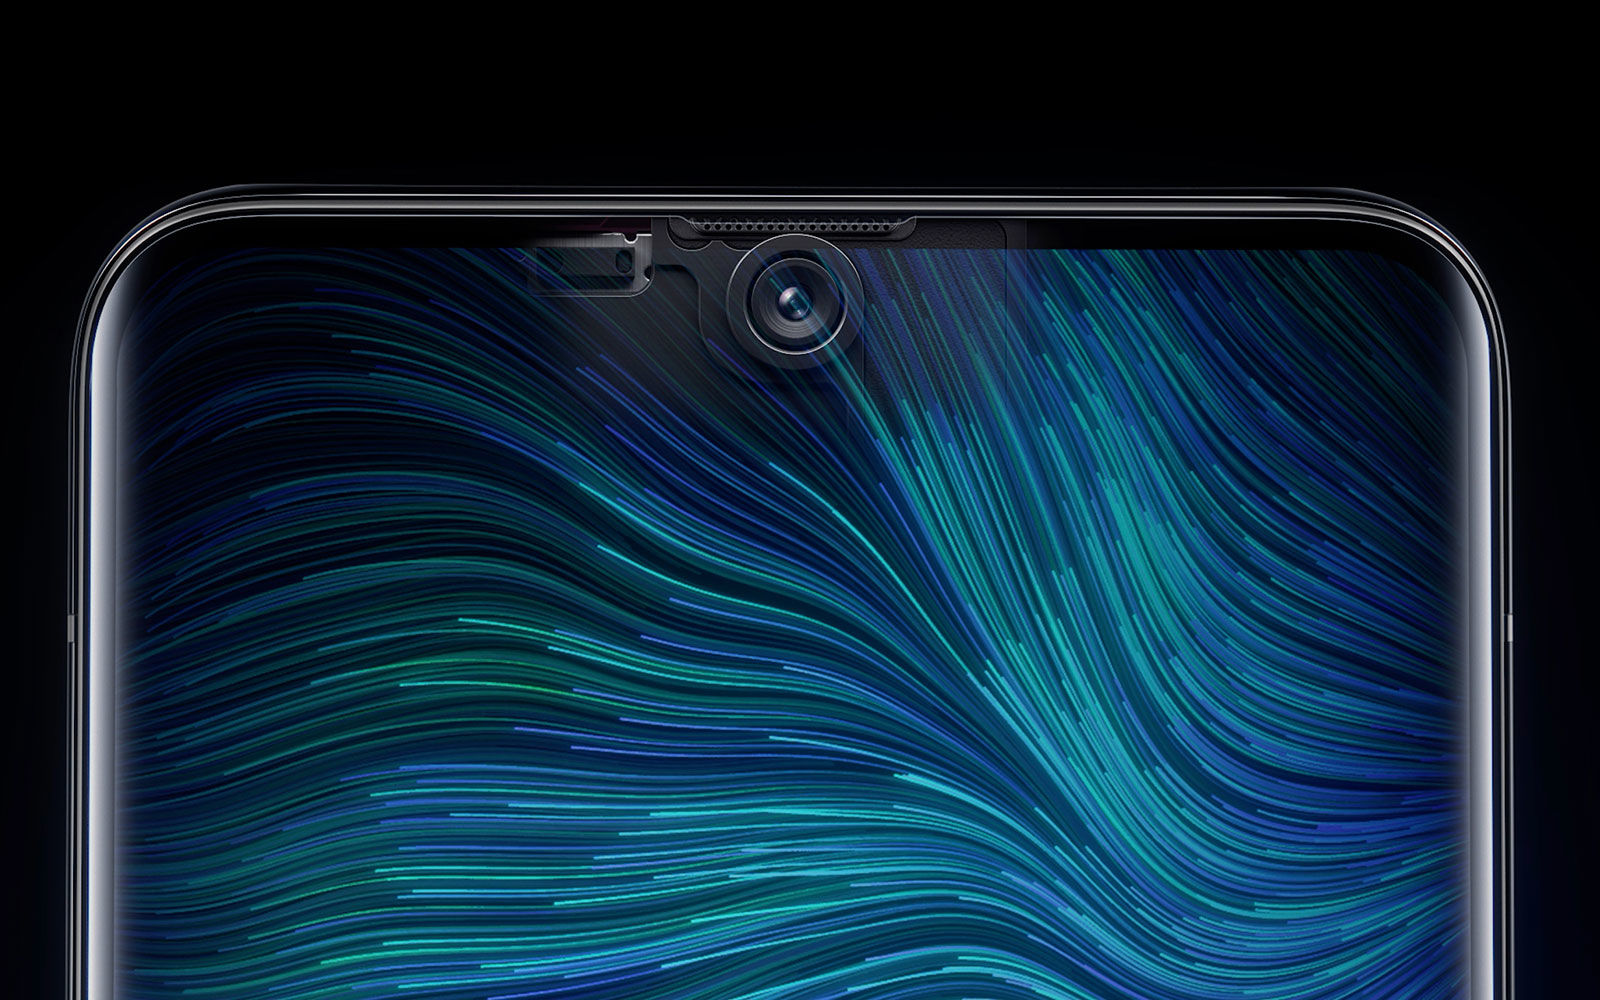 No cropping: OPPO shows the first front camera hidden under the screen